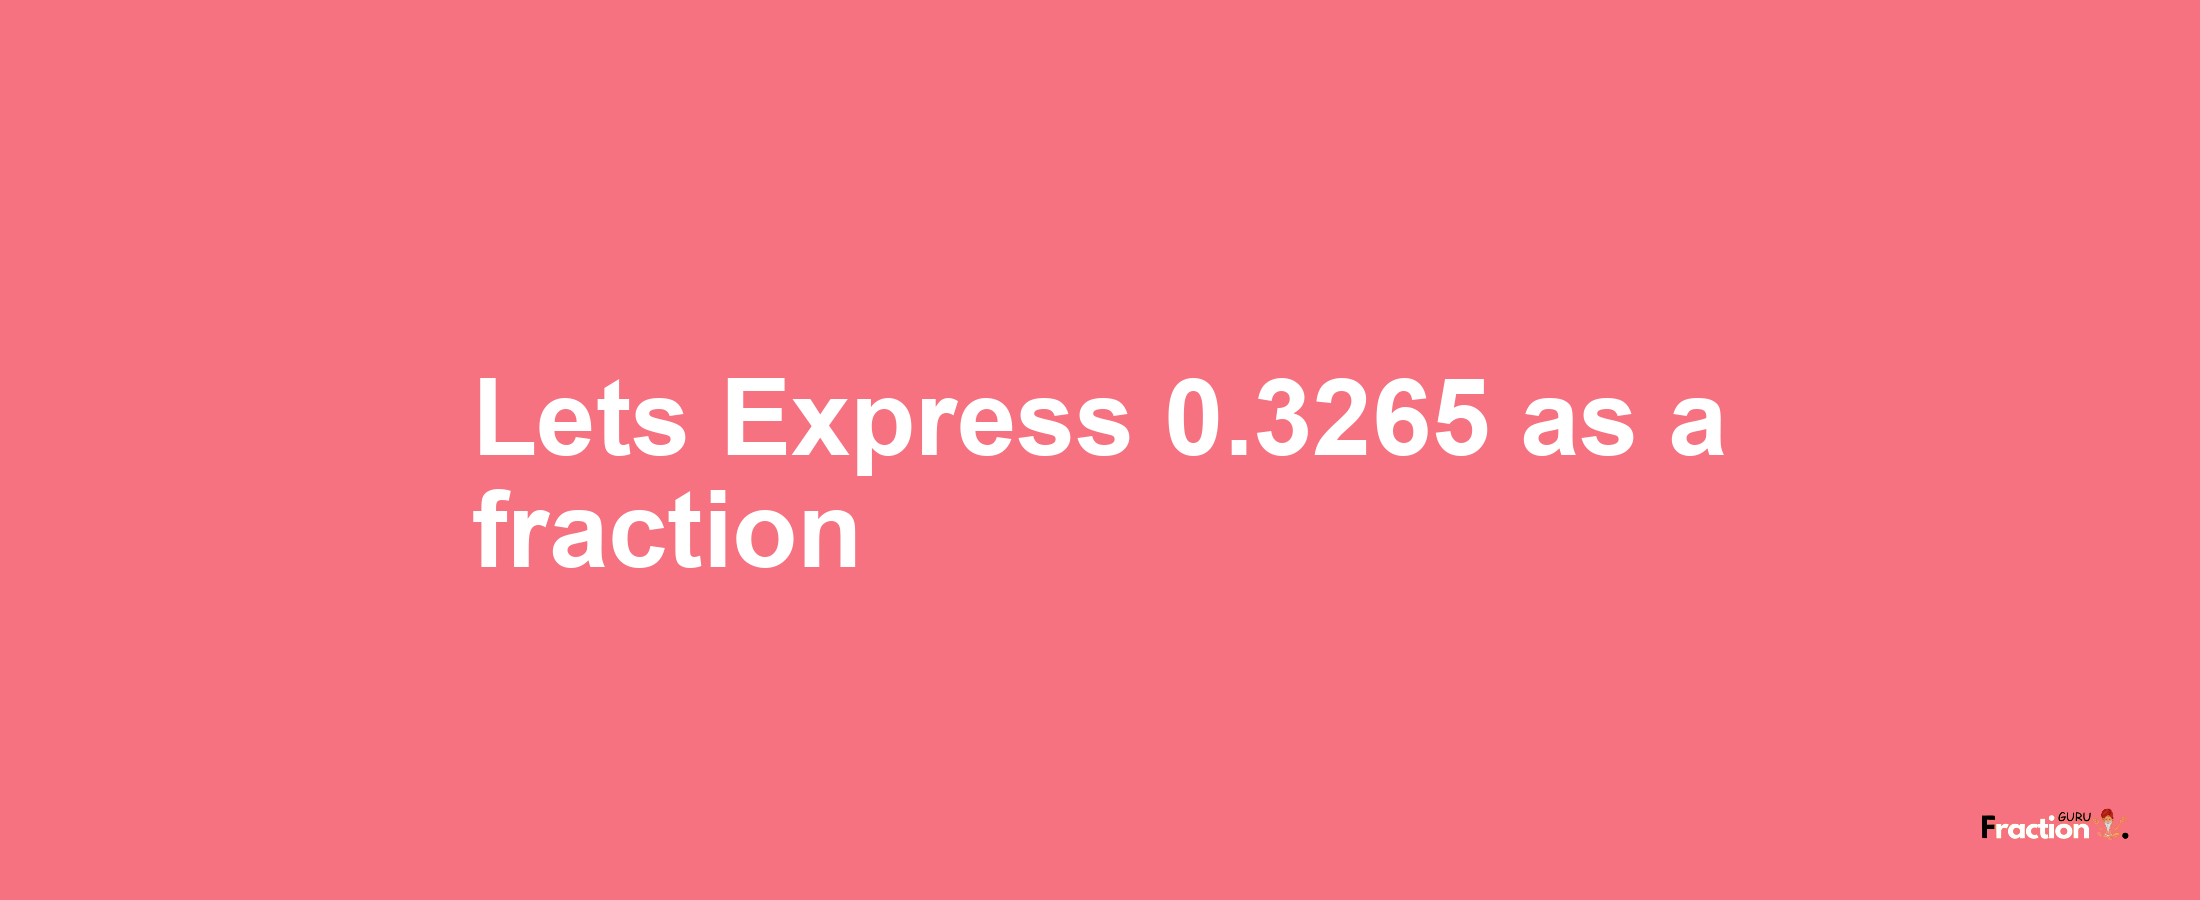 Lets Express 0.3265 as afraction